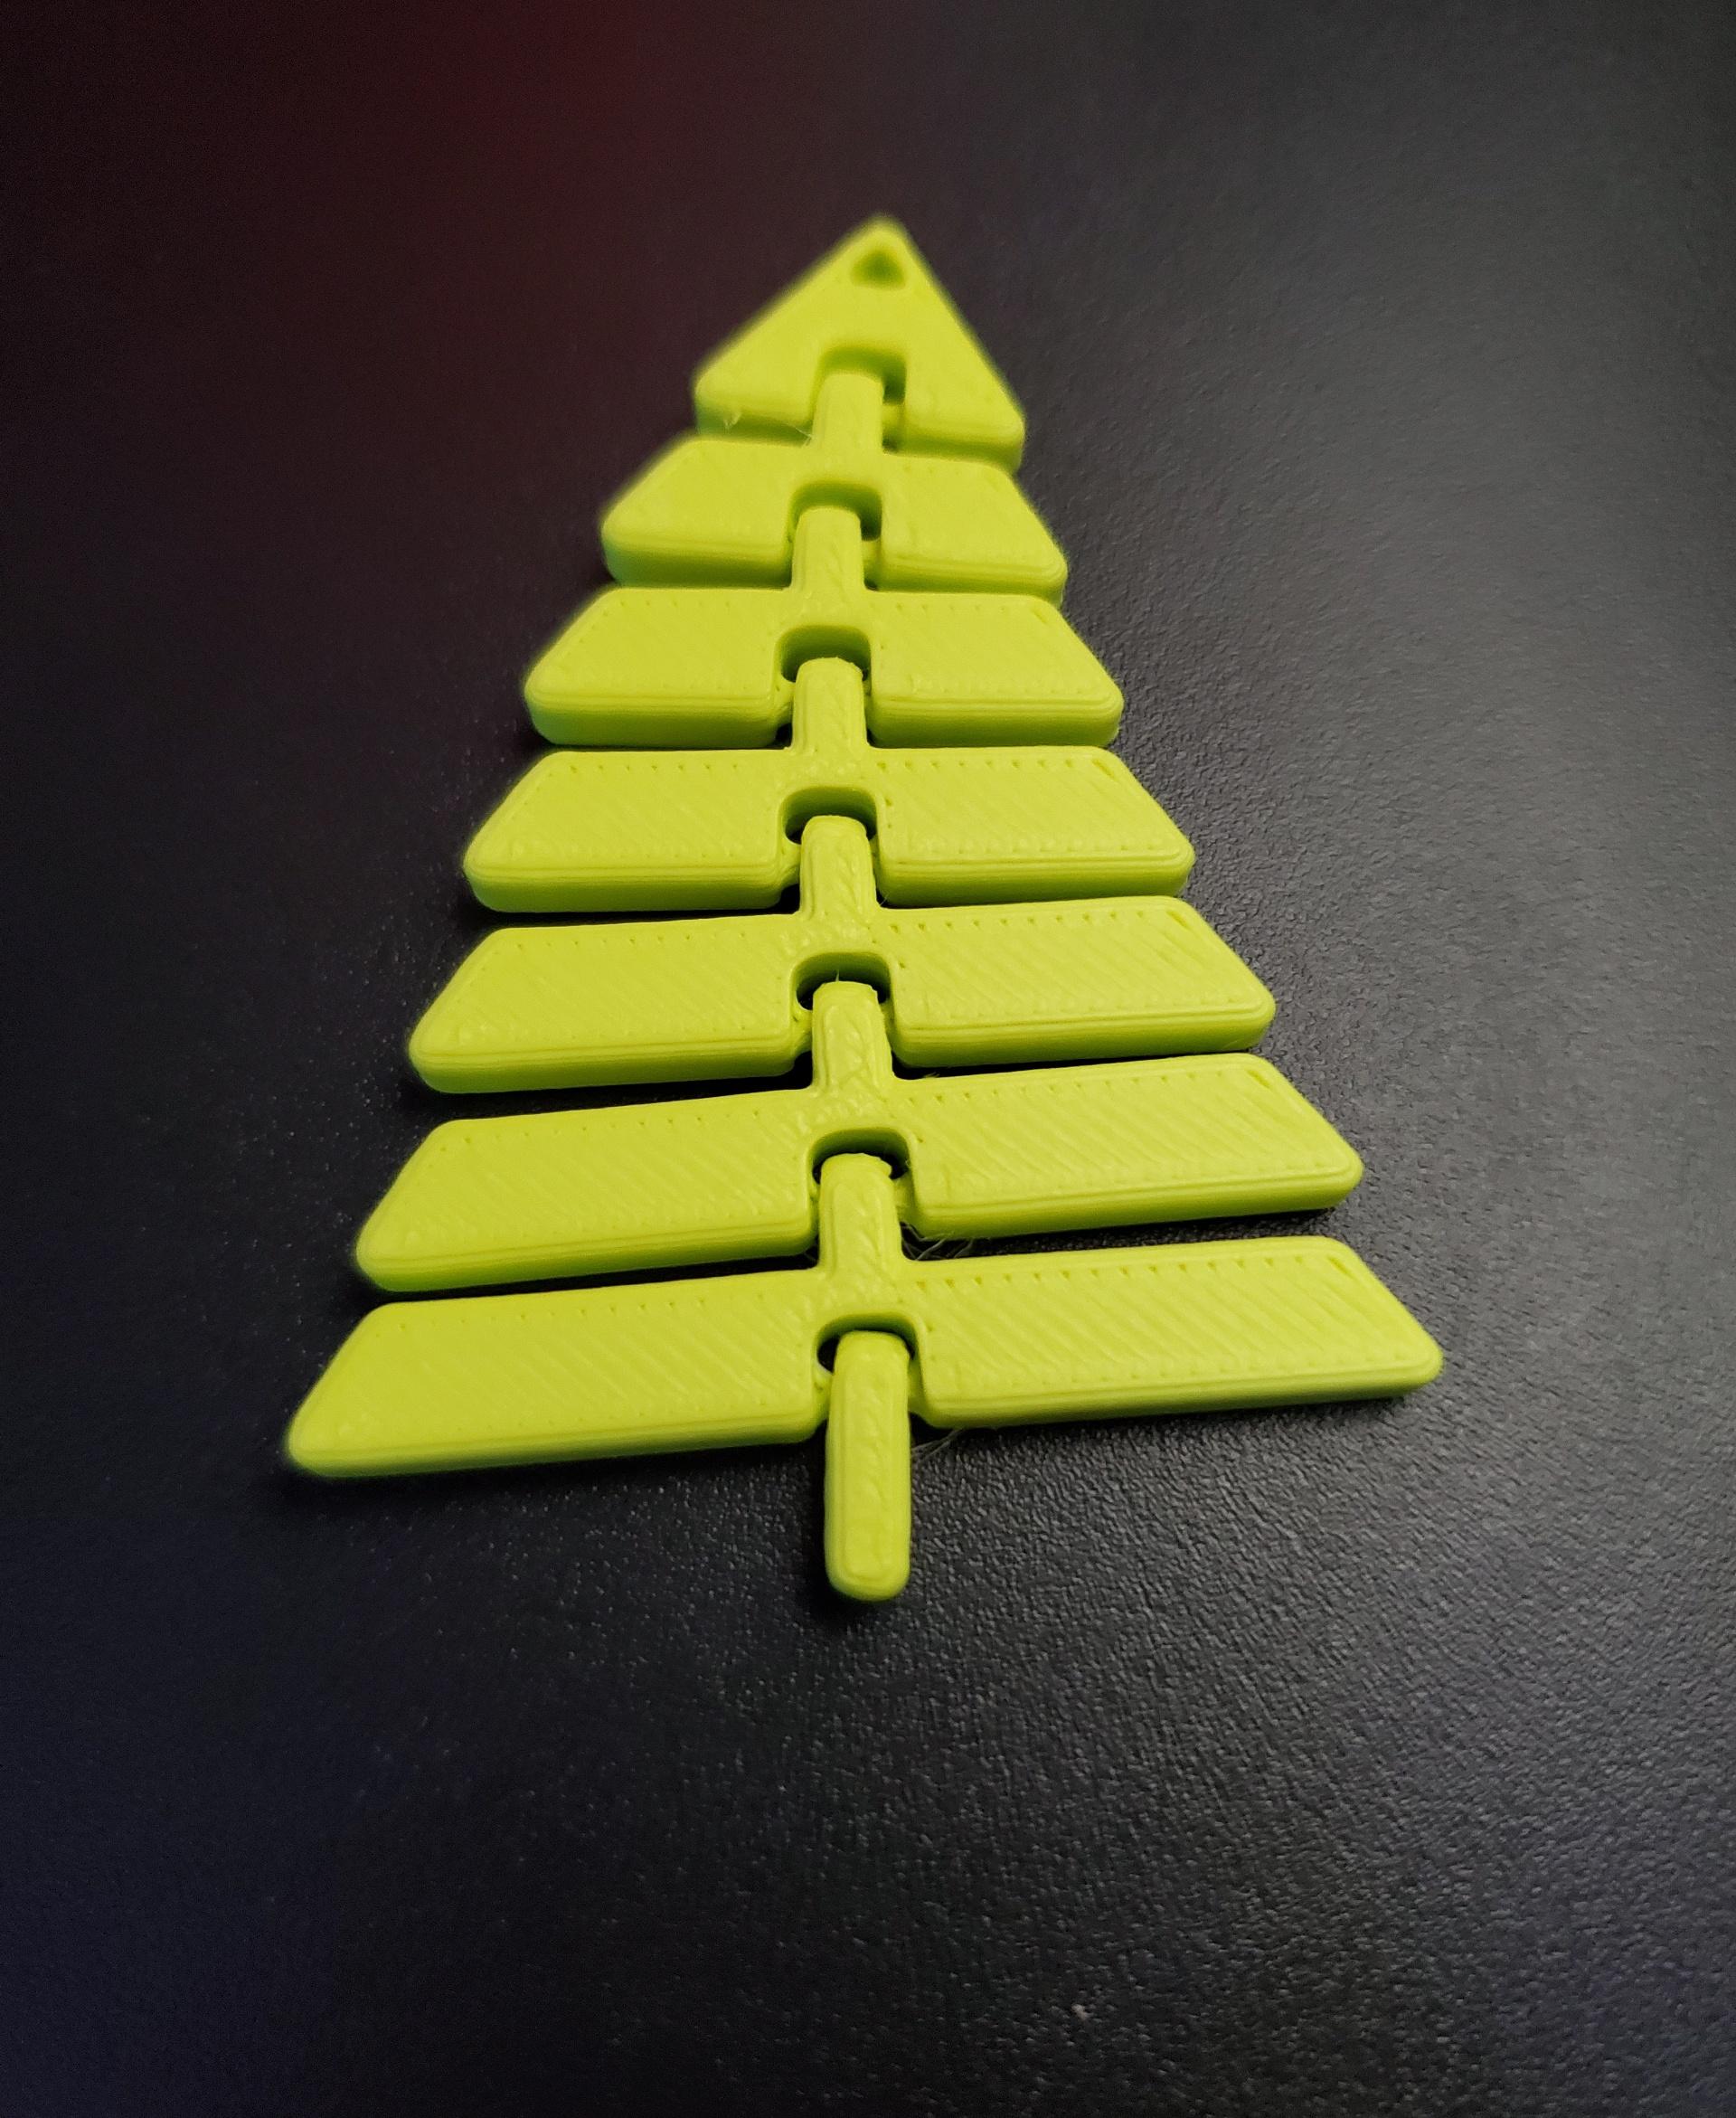 Articulated Christmas Tree Keychain - Print in place fidget toy - polyterra lime green - 3d model